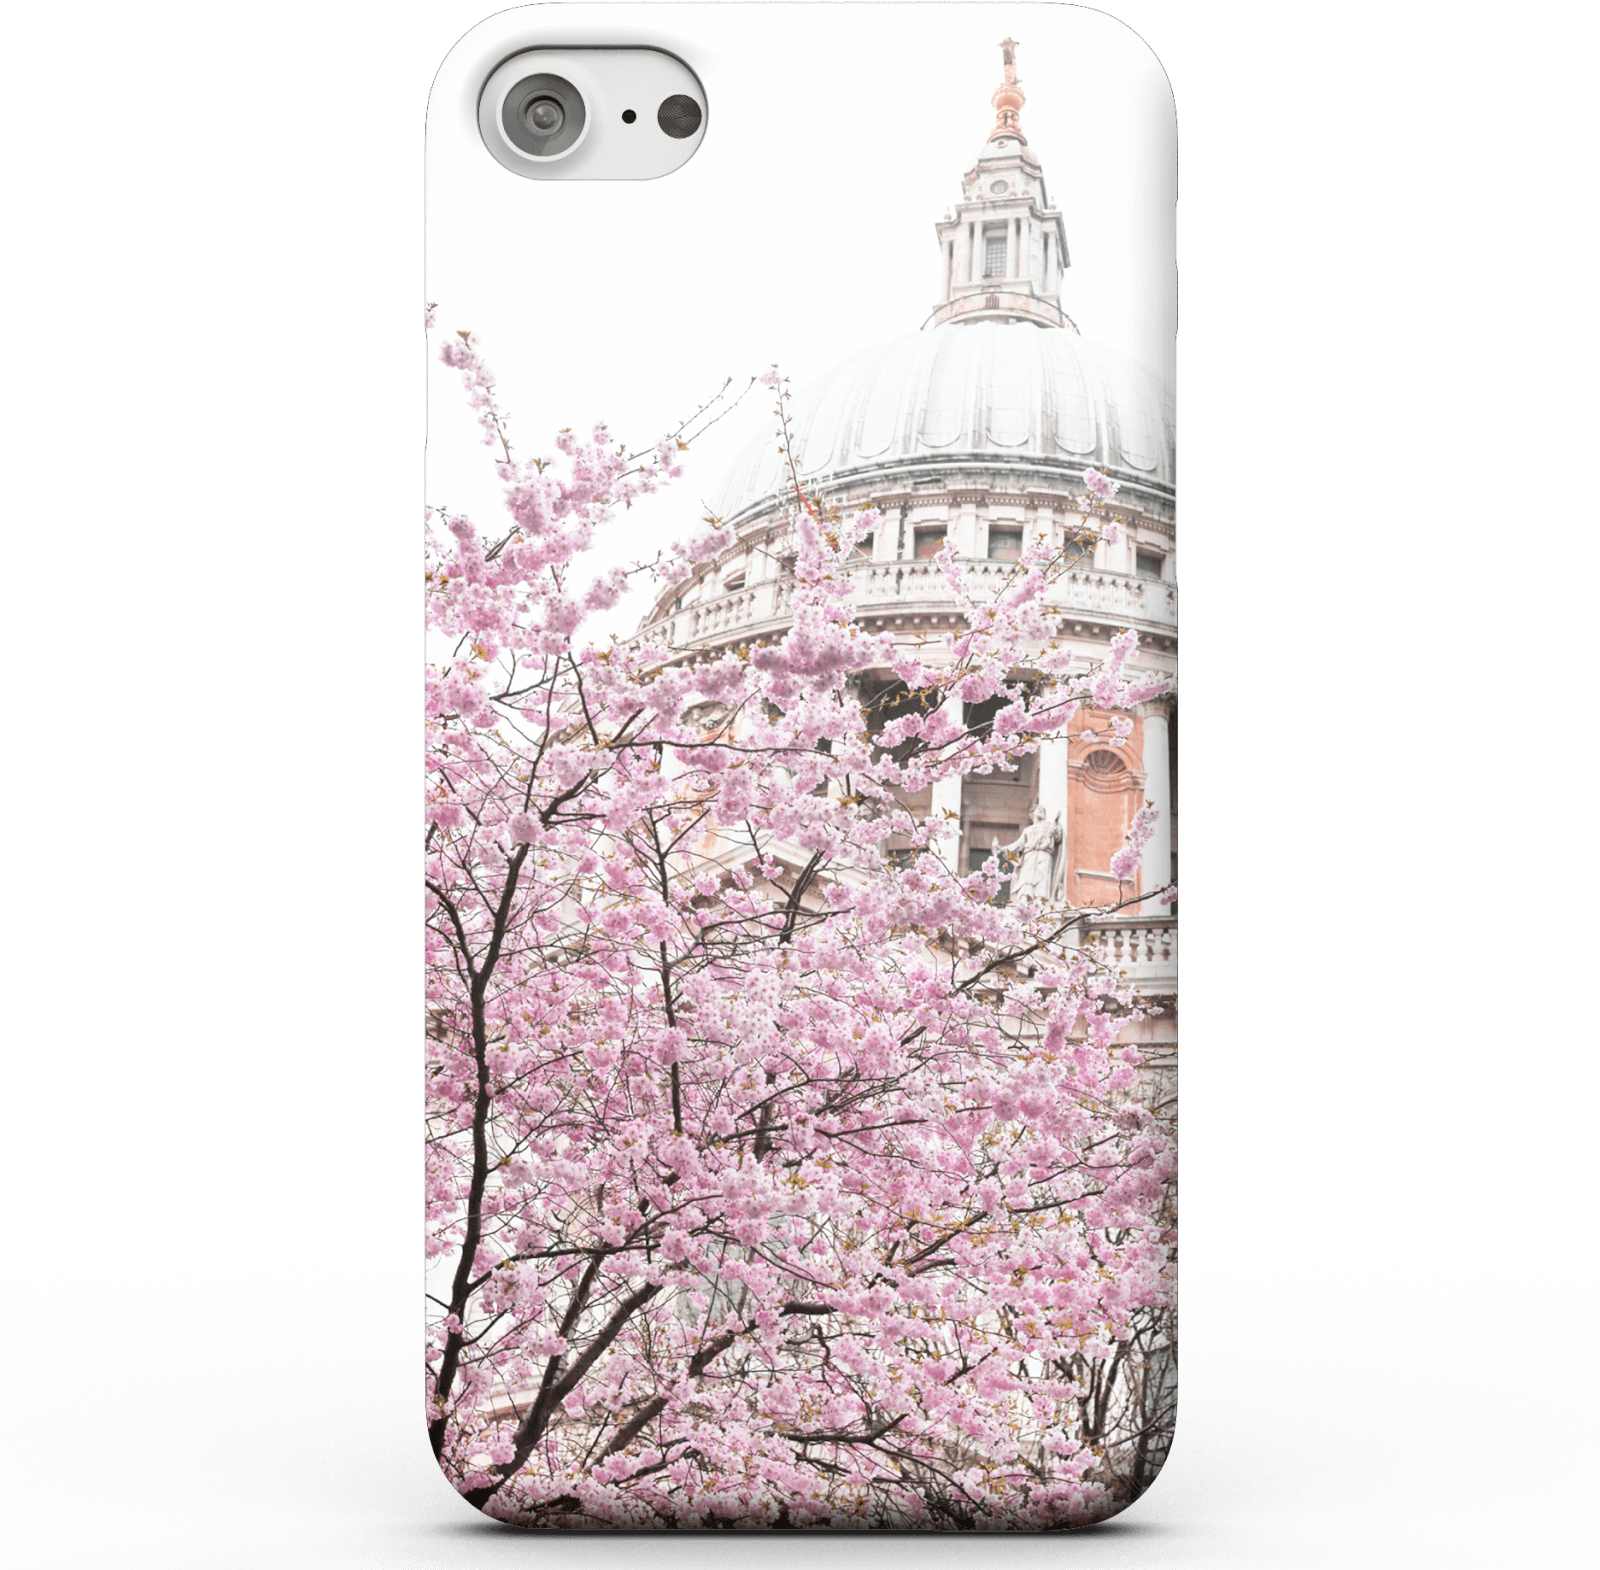 London Sites Phone Case for iPhone and Android - iPhone 5/5s - Snap Case - Matte